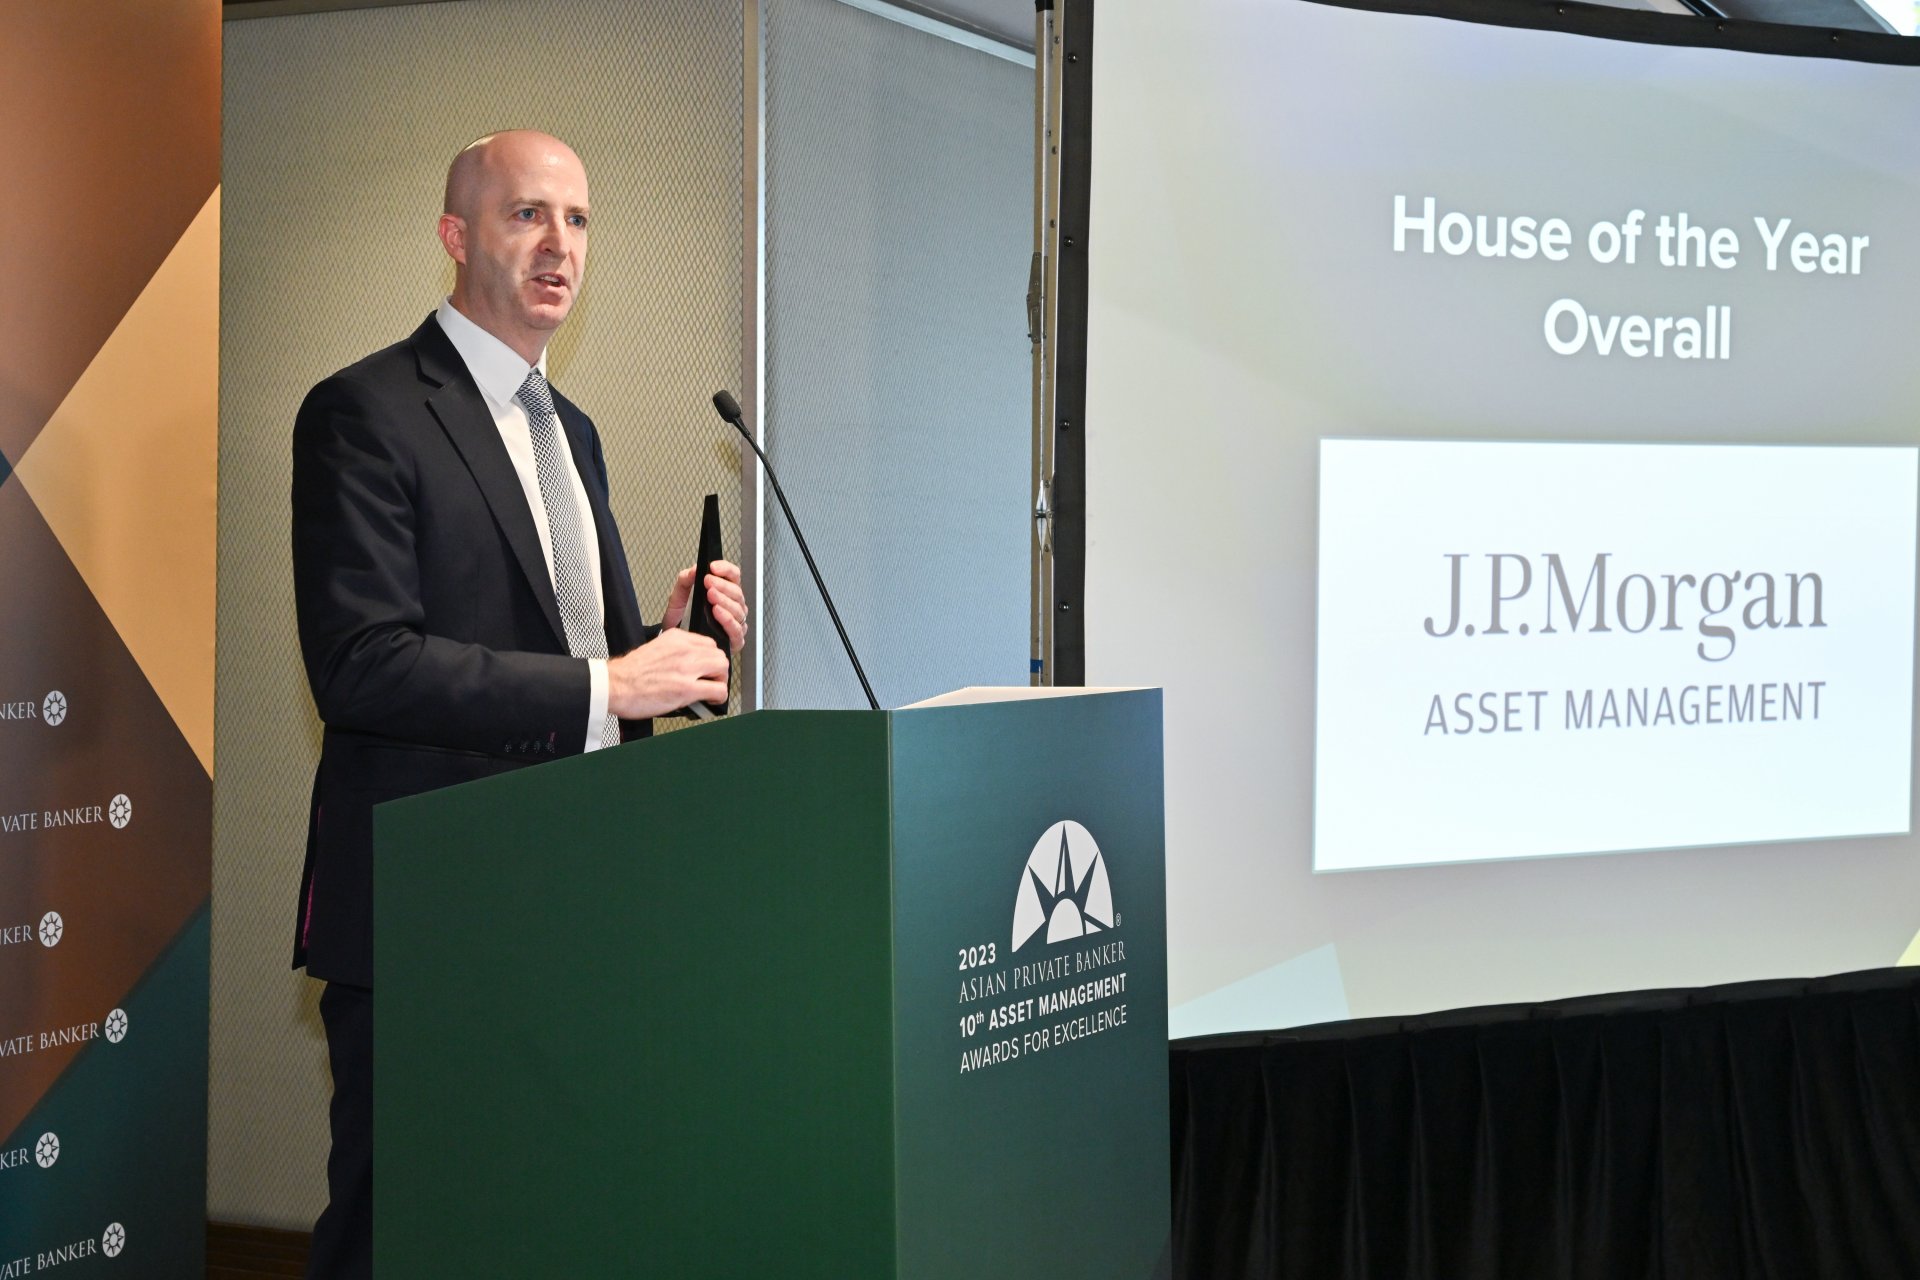 Dan Watkins, Chief Executive Officer, Asia Pacific of J.P. Morgan Asset Management accepts the award for House of the Year - Overall